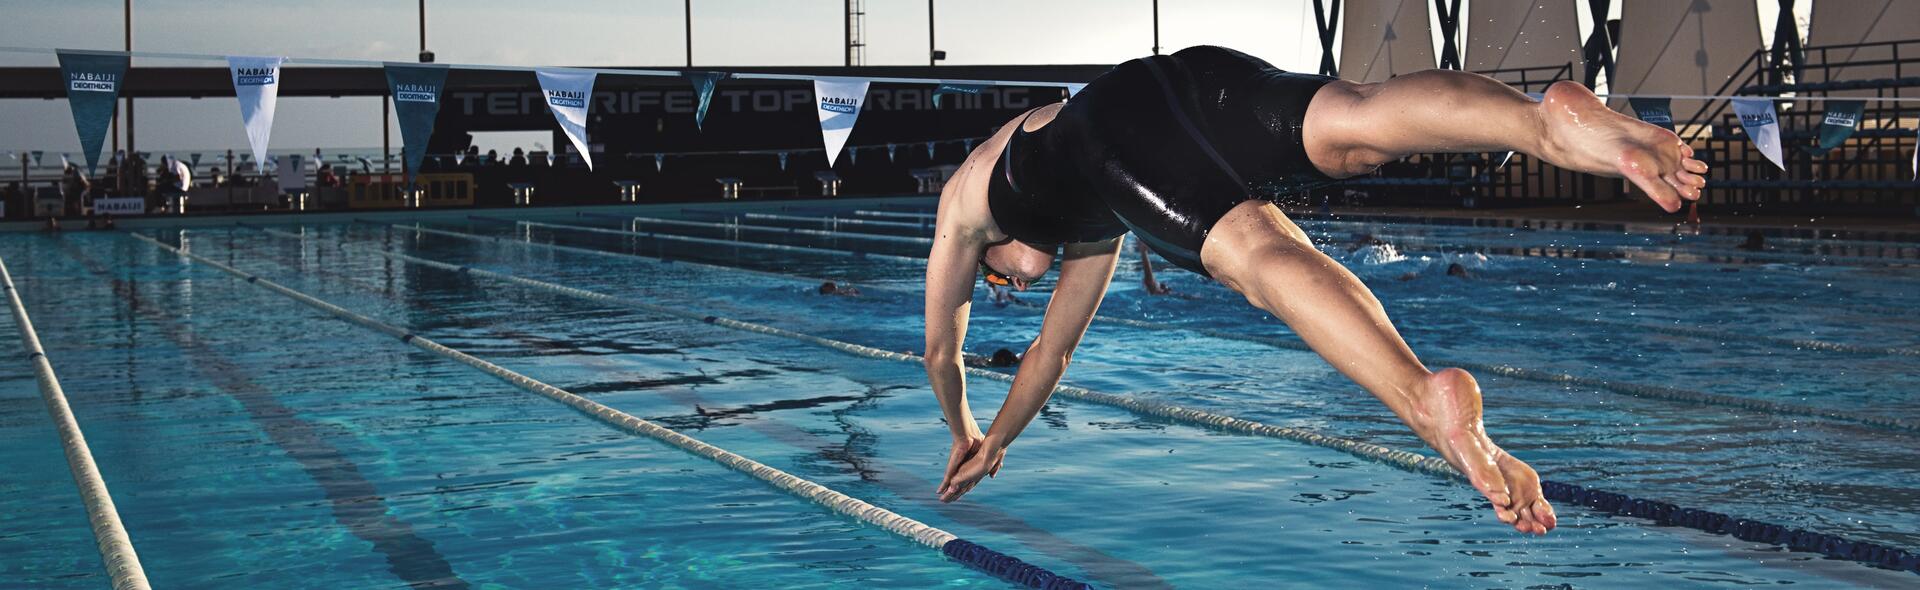 Dive without losing your swimming goggles